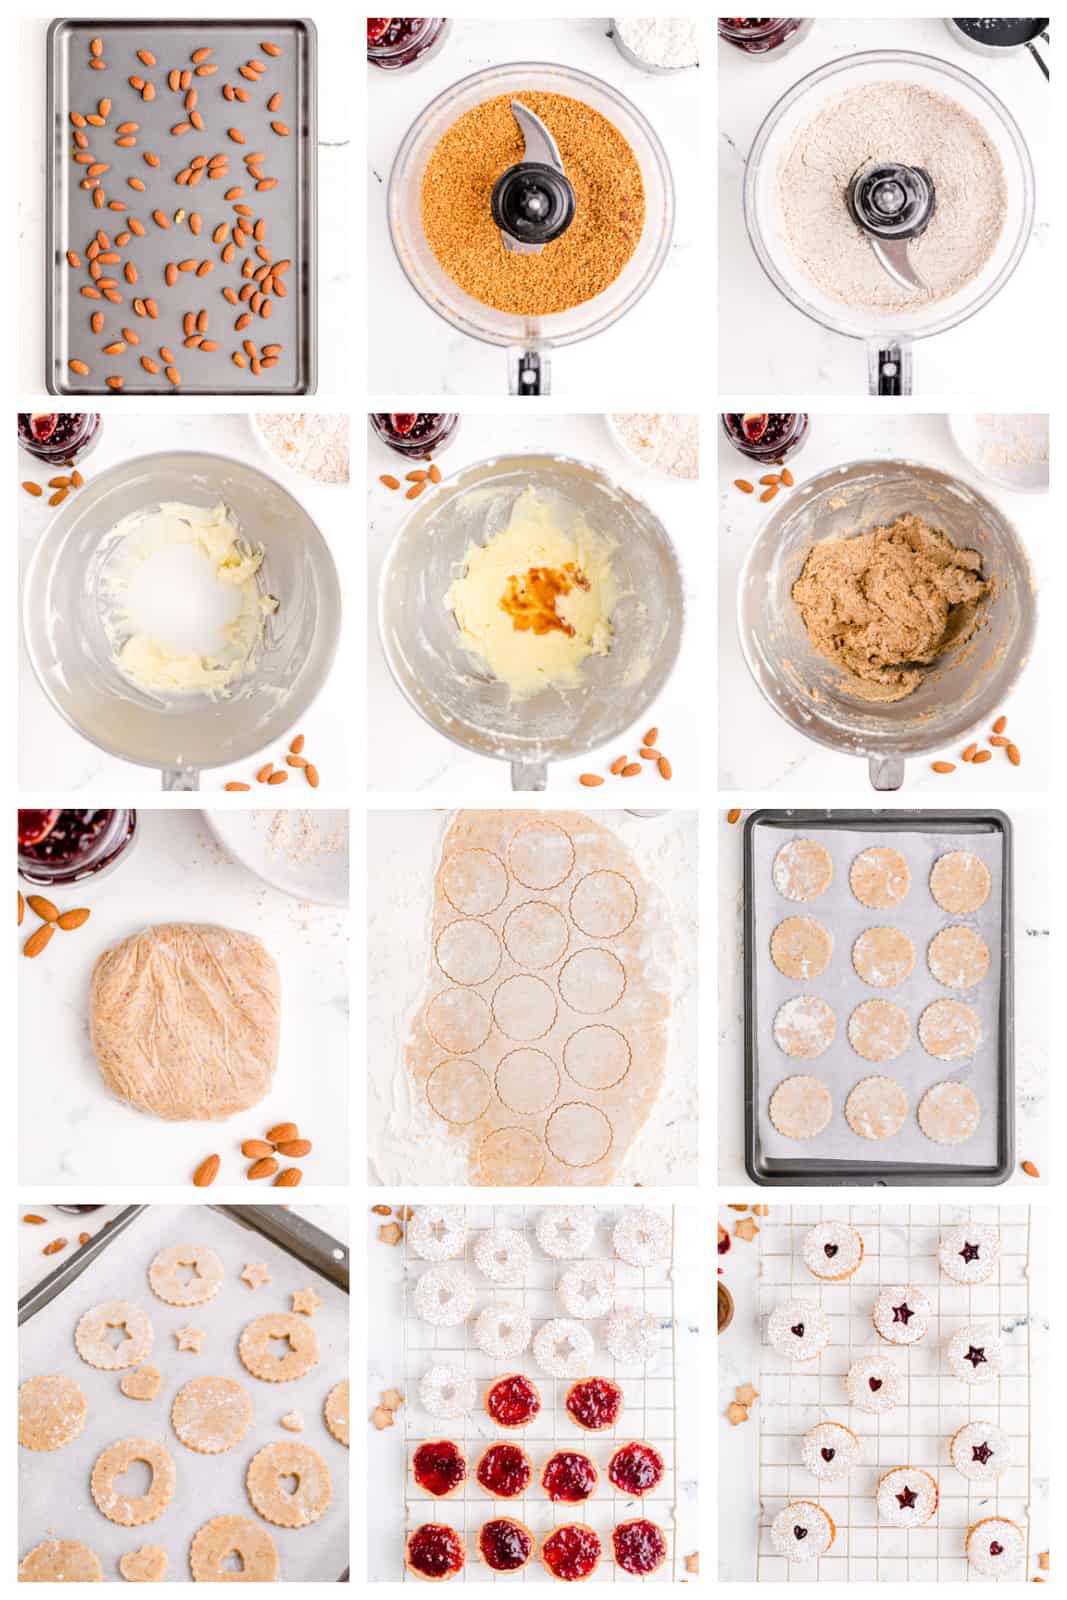 Step by step photos on how to make Linzer Cookies.